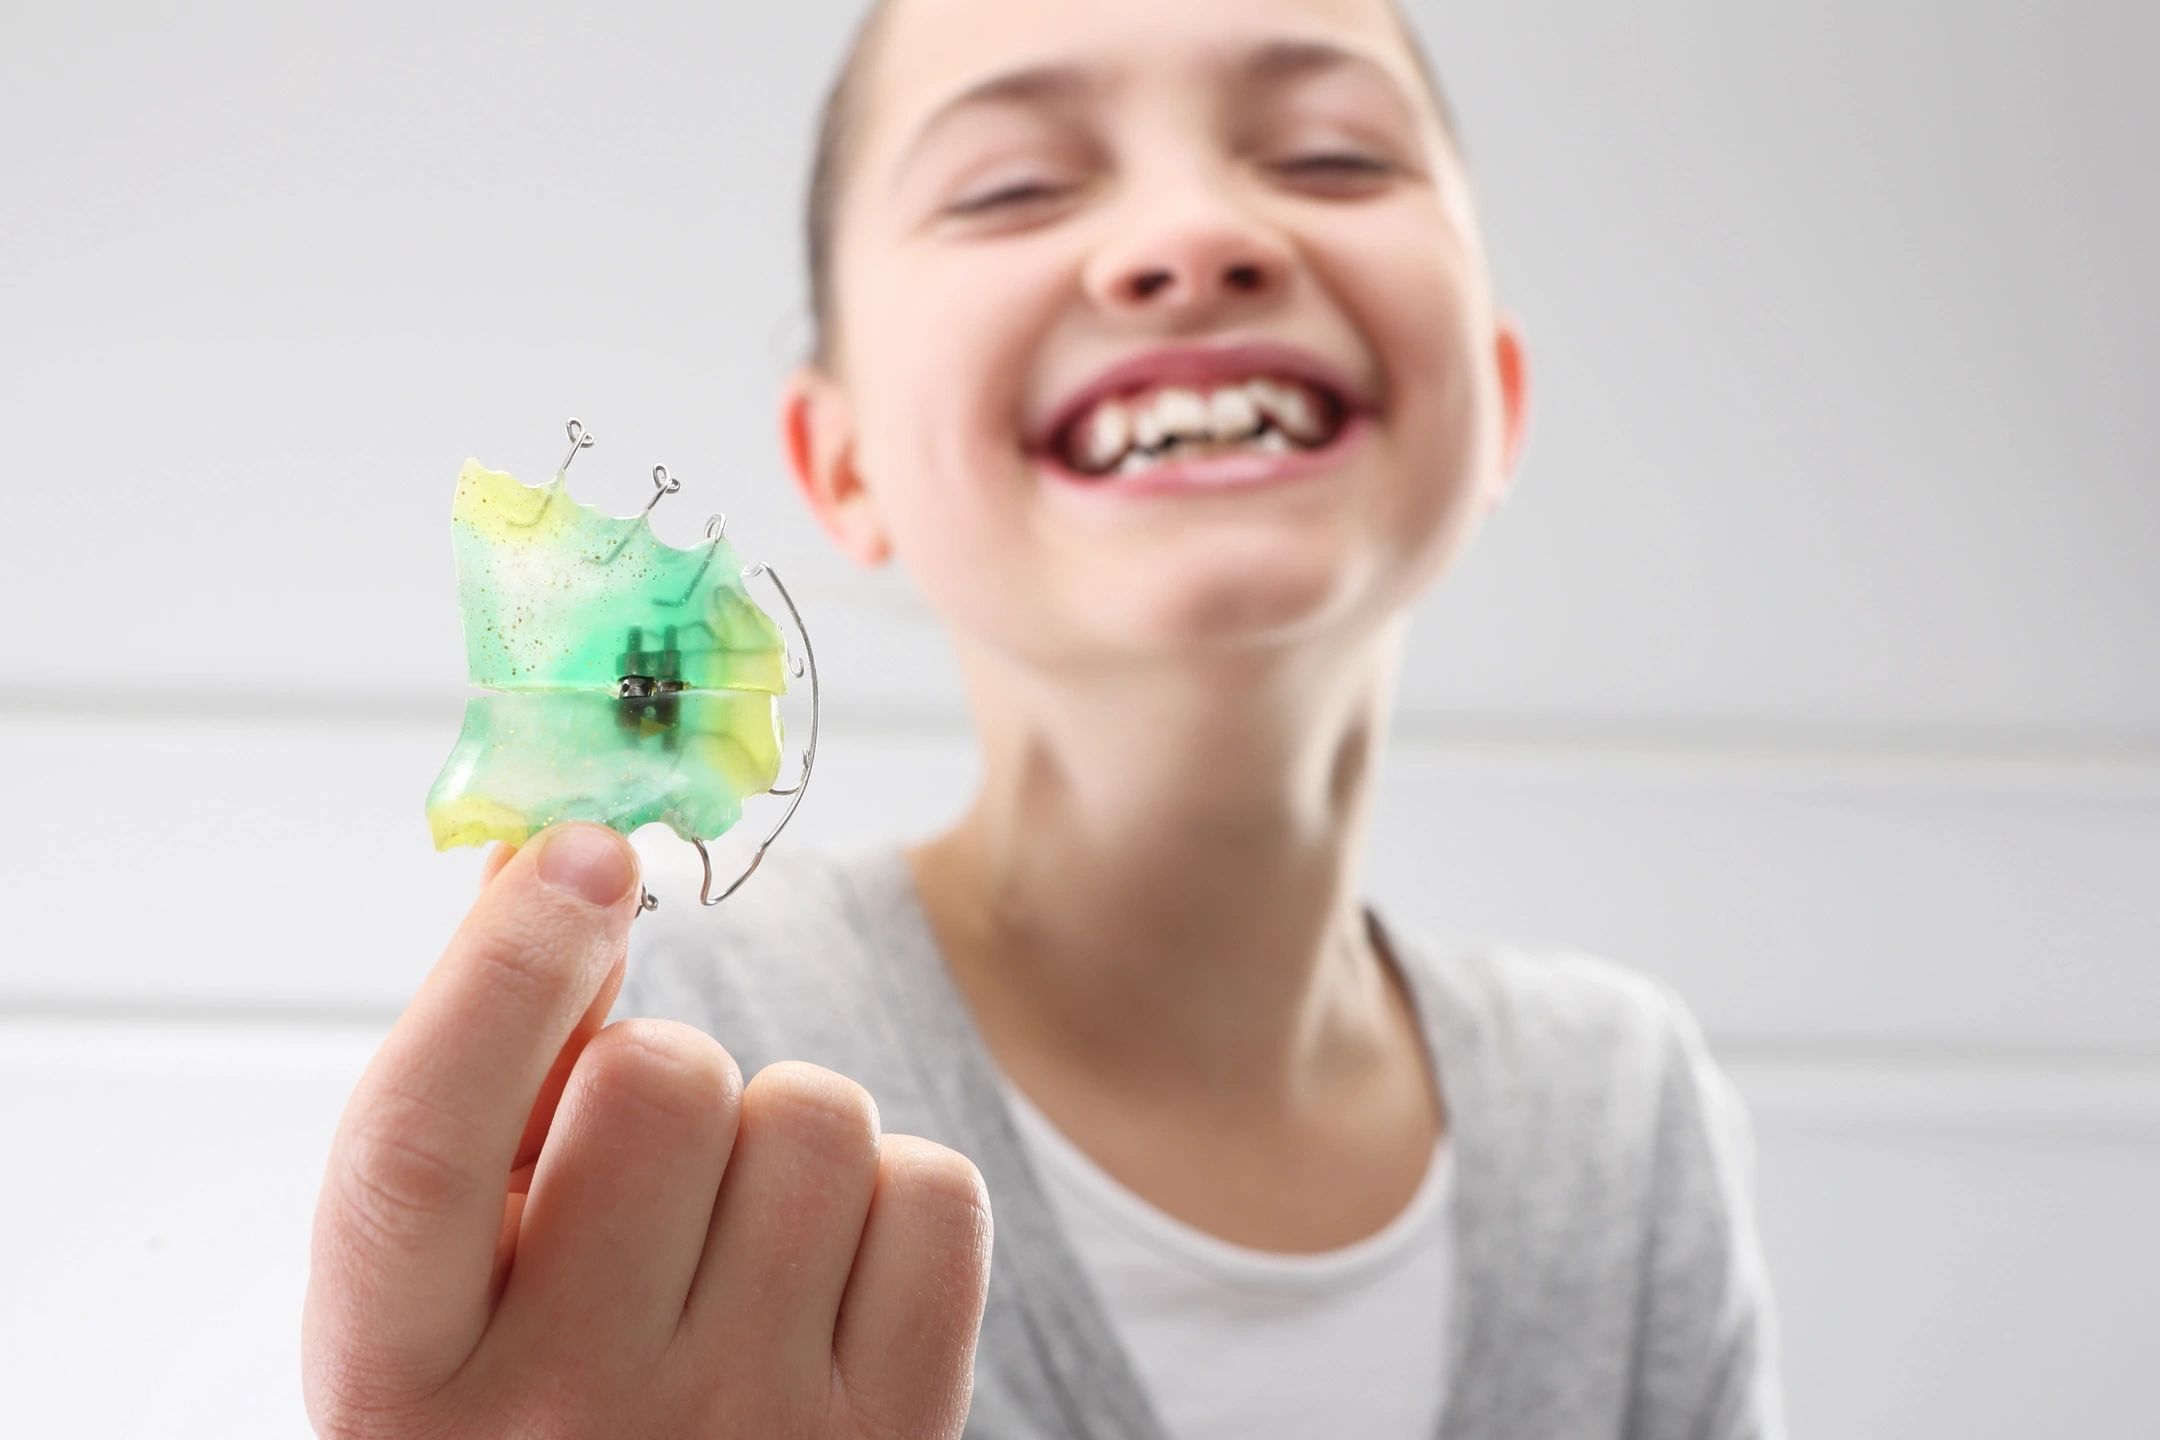 A child holding an orthodontic Hawley retainer made by an orthodontic lab.